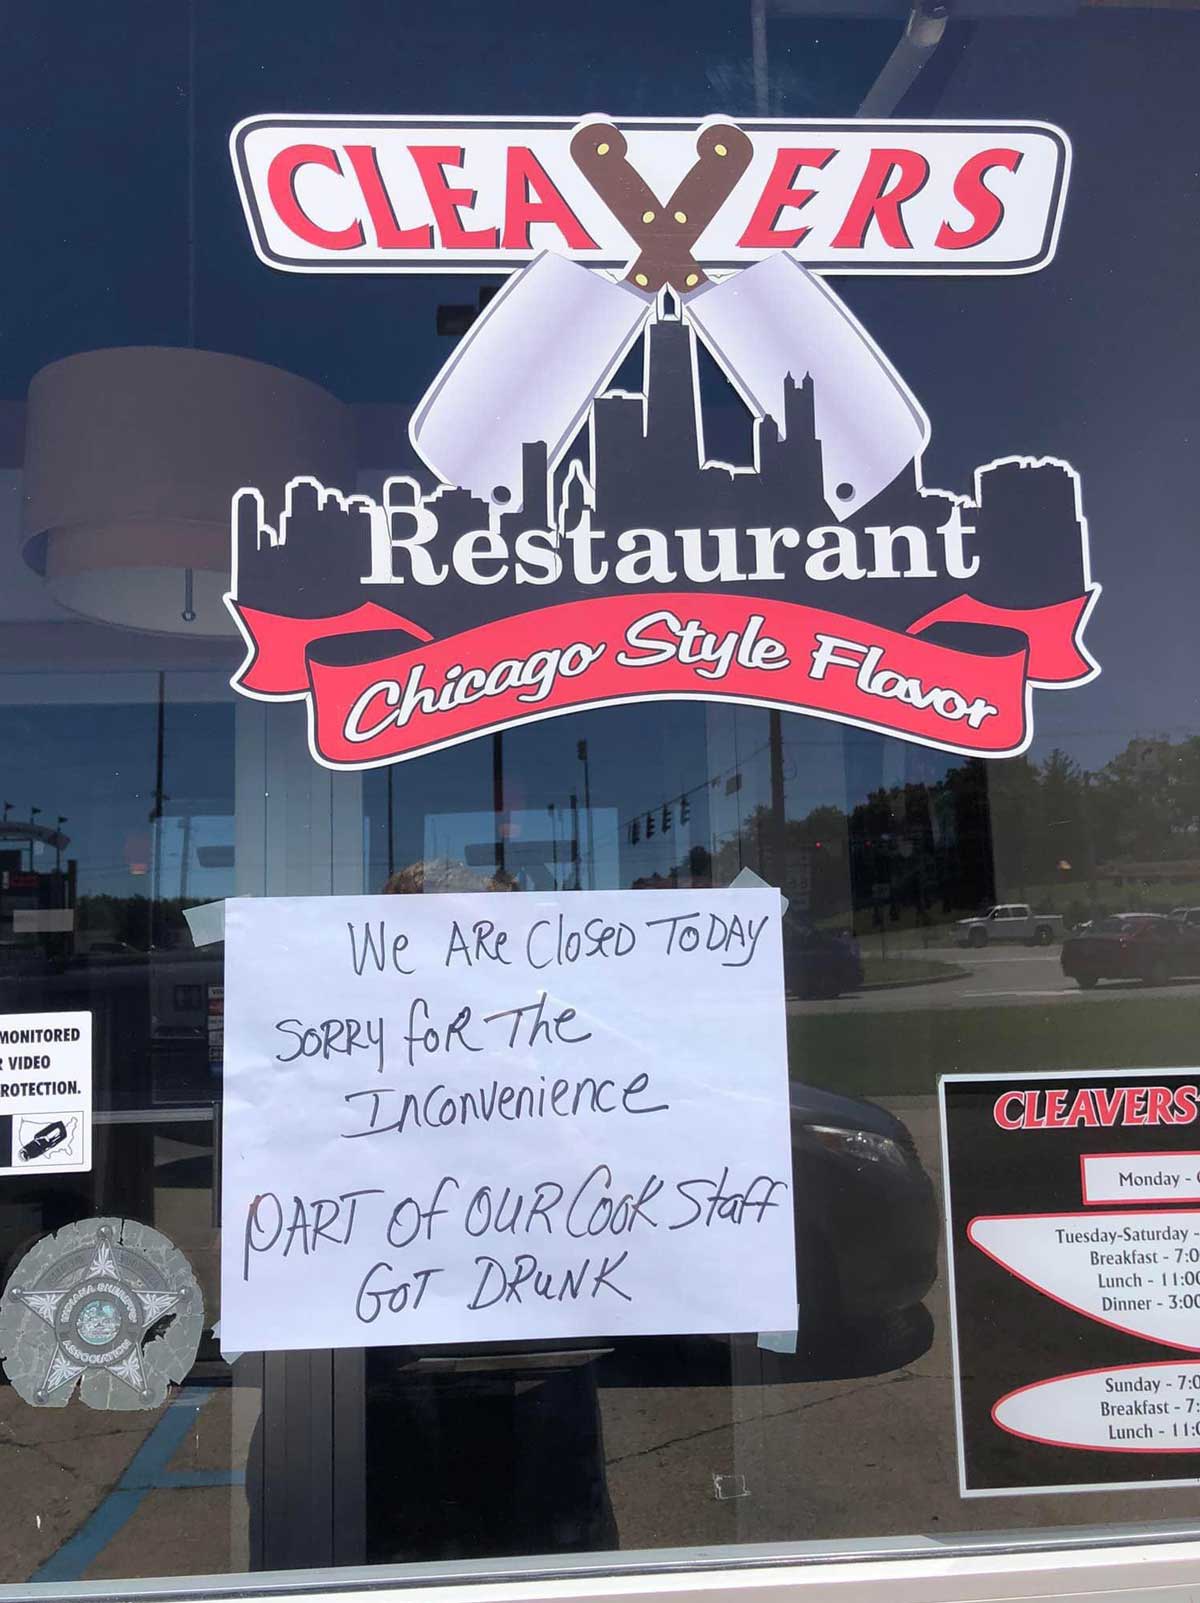 A friend saw this on a local restaurant today in my hometown